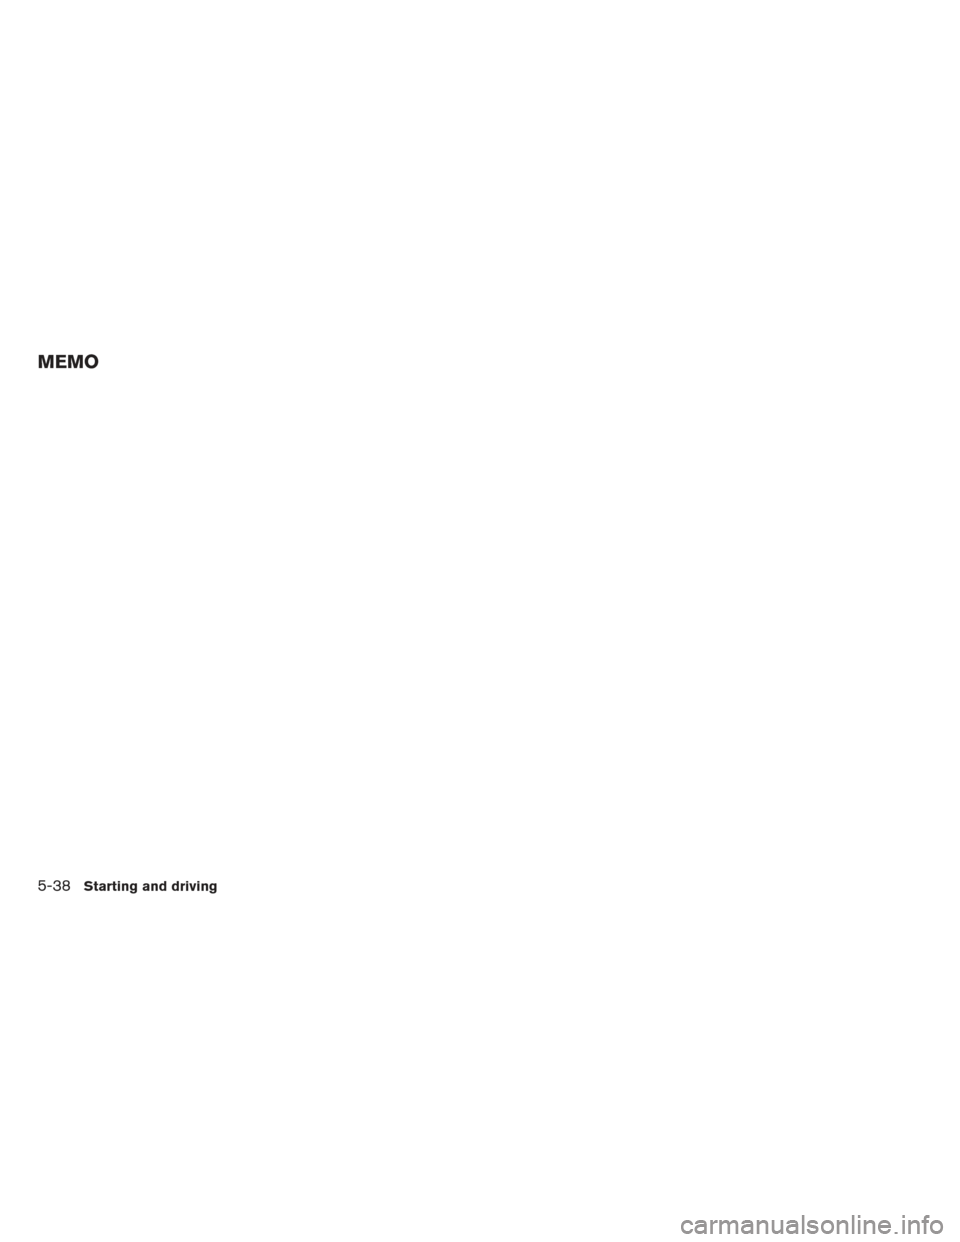 NISSAN ALTIMA 2013 L33 / 5.G Owners Manual MEMO
5-38Starting and driving 